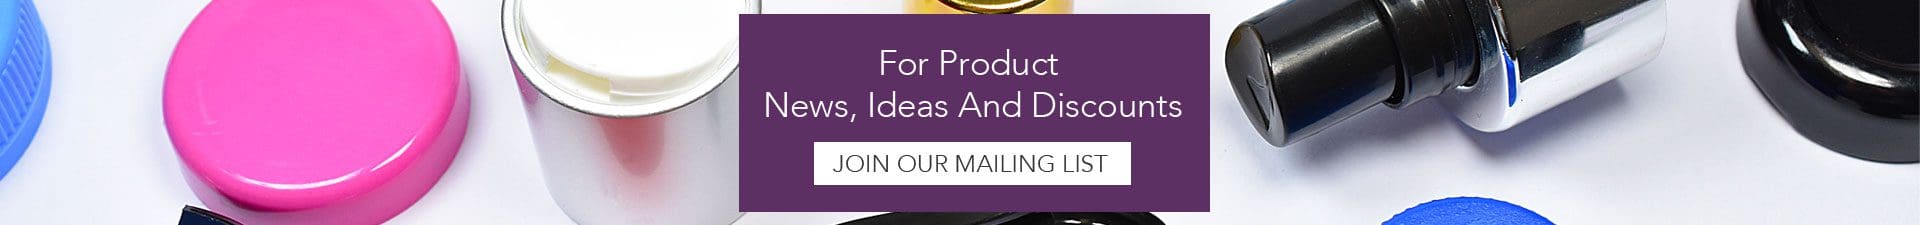 email banner